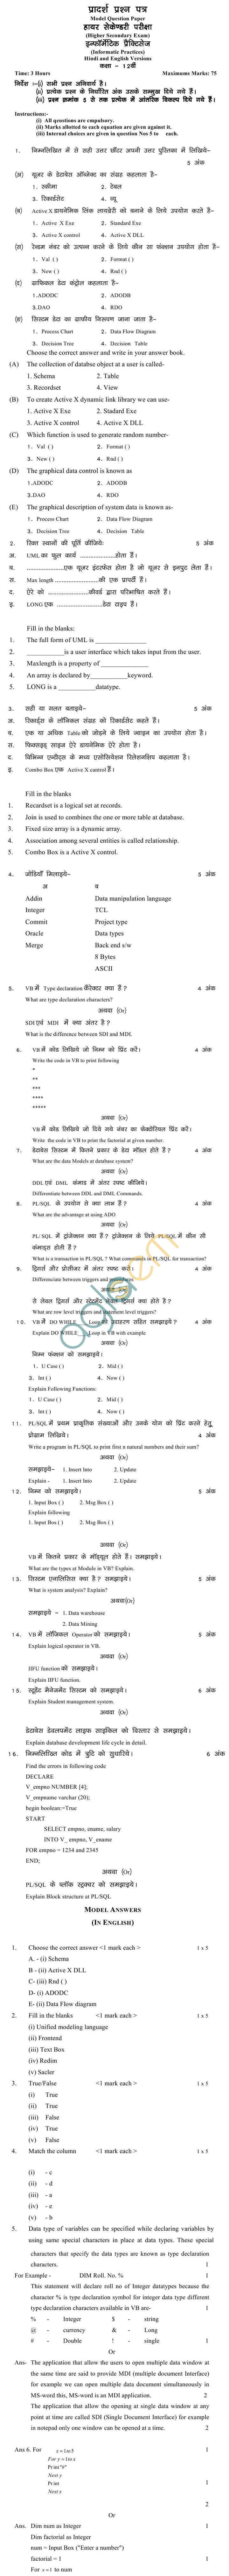 MP Board Class XII Informatic Pratices Model Questions & Answers - Set 3